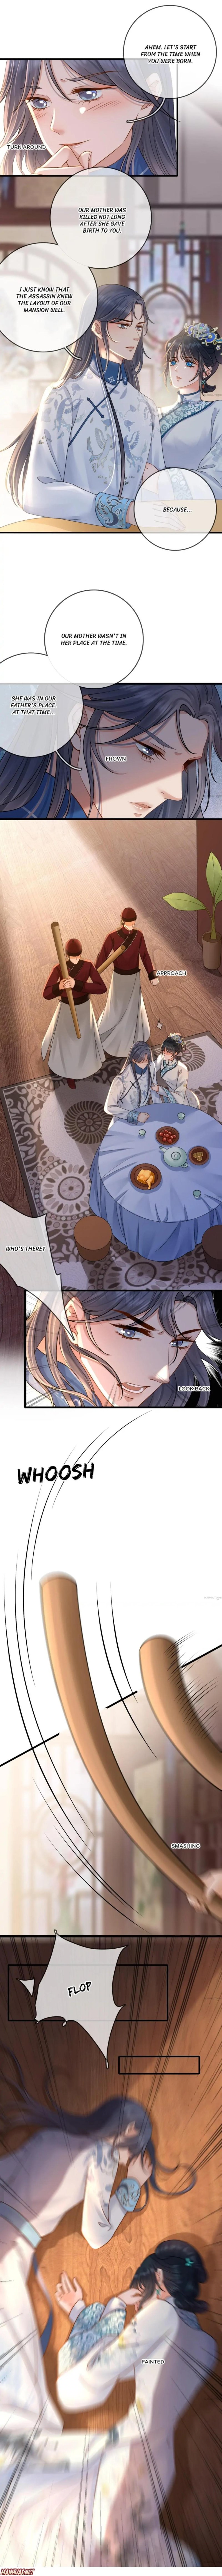 Your Highness, Enchanted By Me! - Page 2